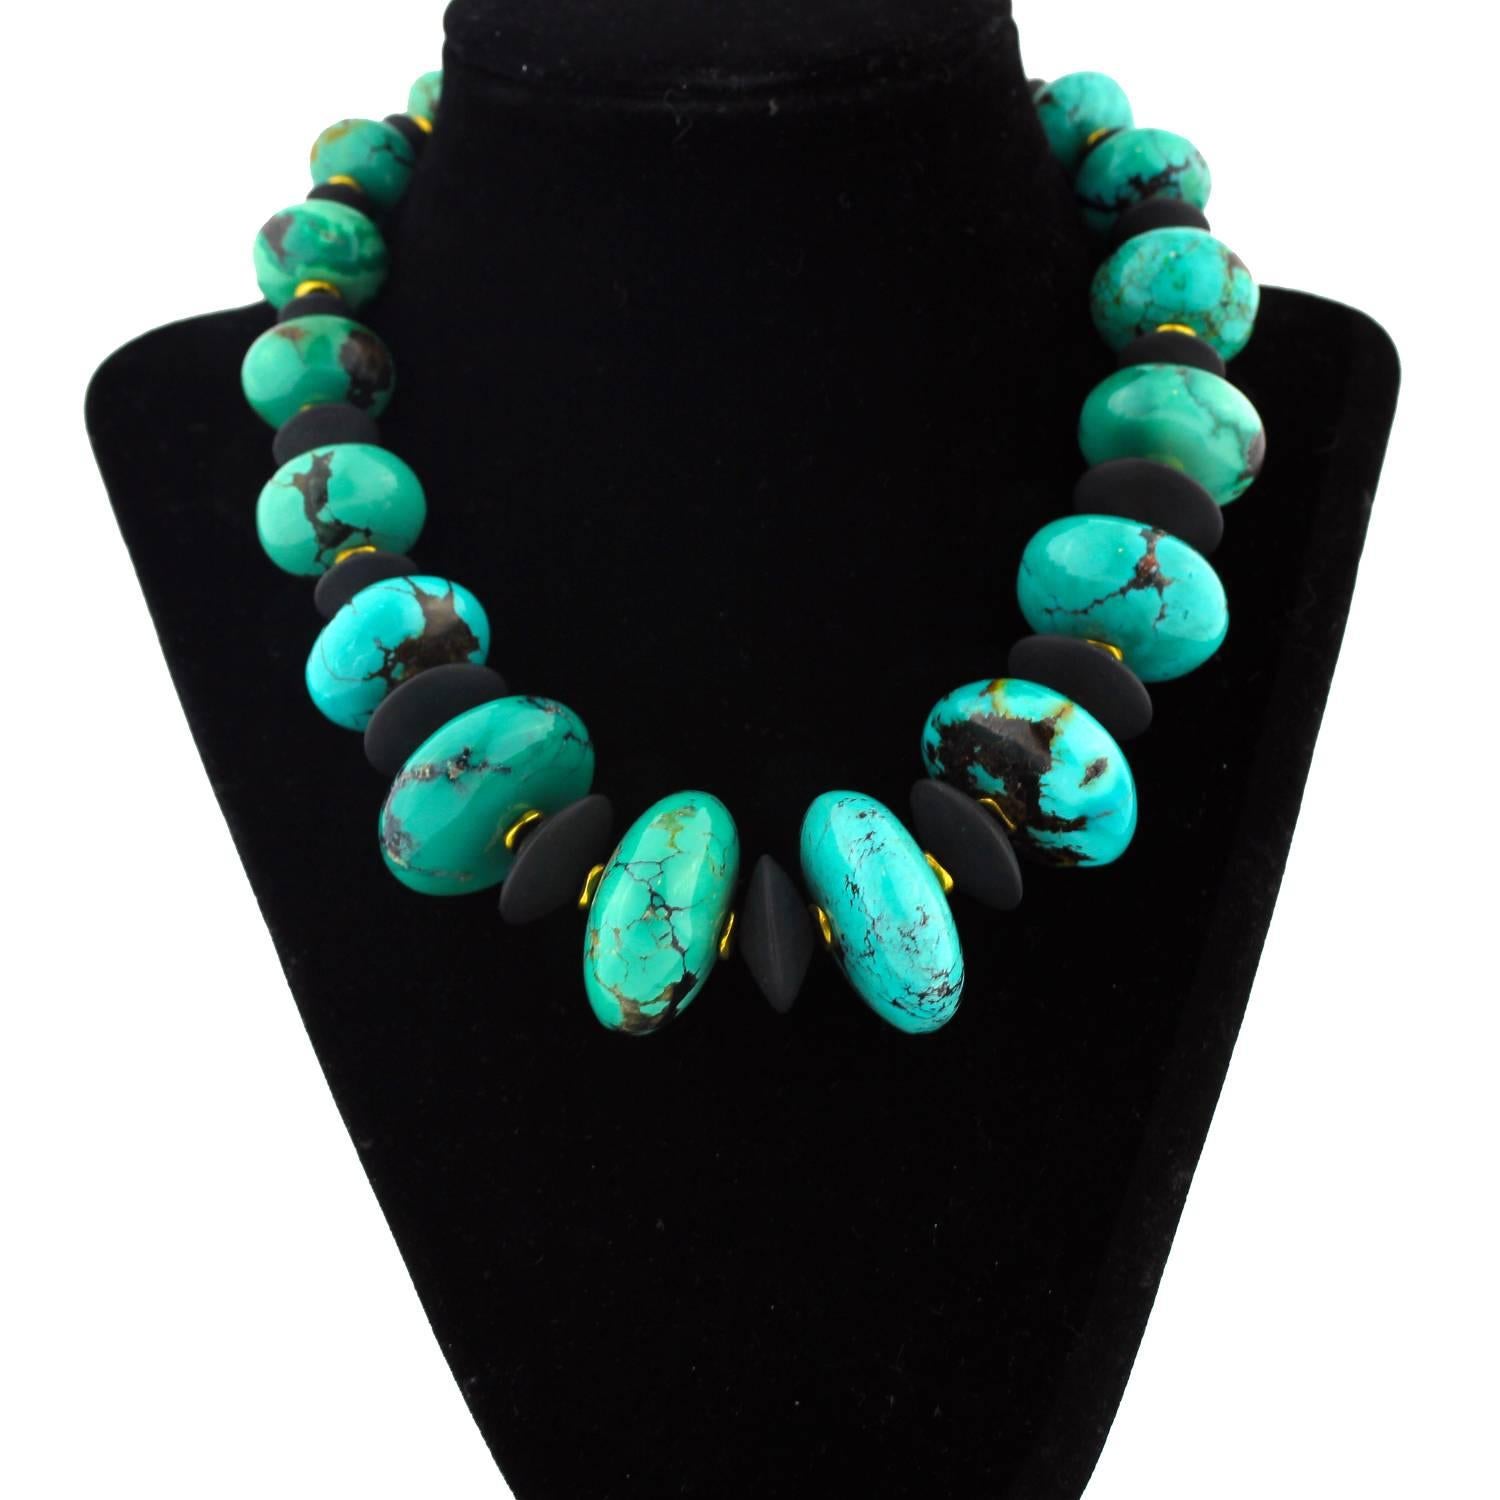 Extraordinary highly polished  17 inch long graduated natural glowing American Turquoise handmade necklace.   The focal point gemstone is 32.7mm.  These luscious Turquoise rondells are enhanced with flat black Onyx and gold tone accents and clasp in